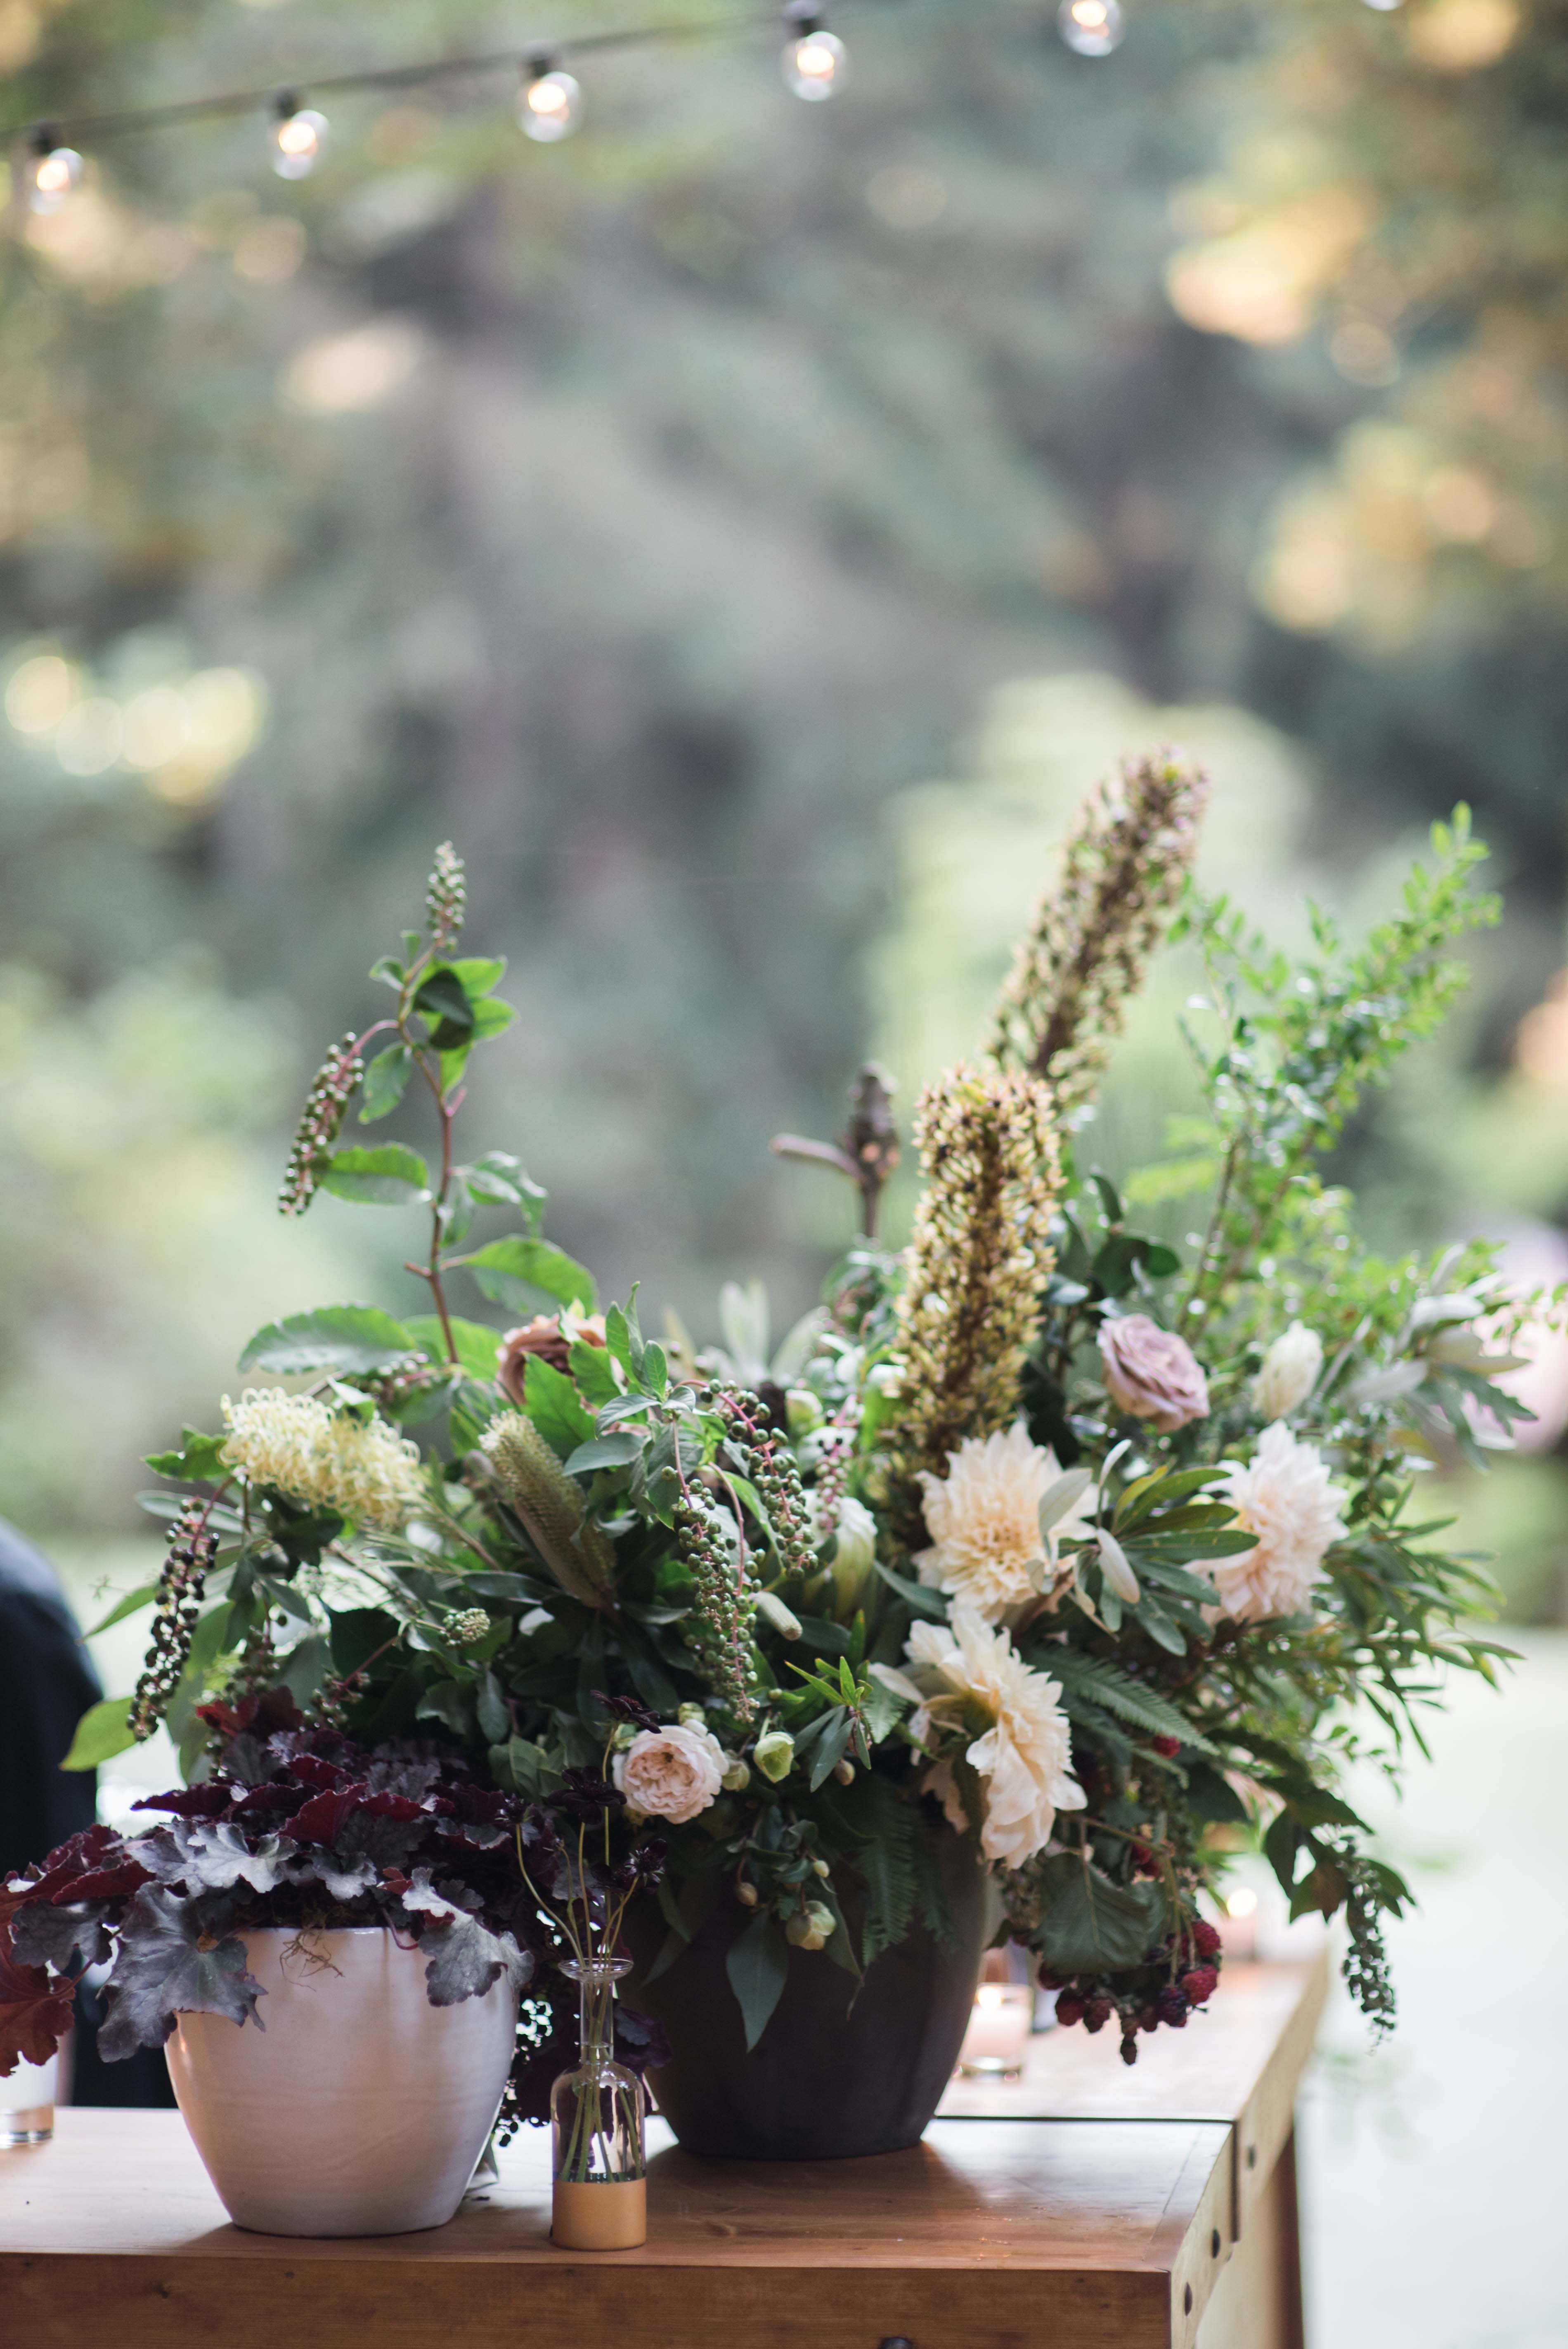 Asymmetrical florals, dusty rose and burgundy flowers - How to use your wedding color palette in a different season - Leah E. Moss Designs - Photo: Christina Richards Photography; Planning: Cassy Rose Events